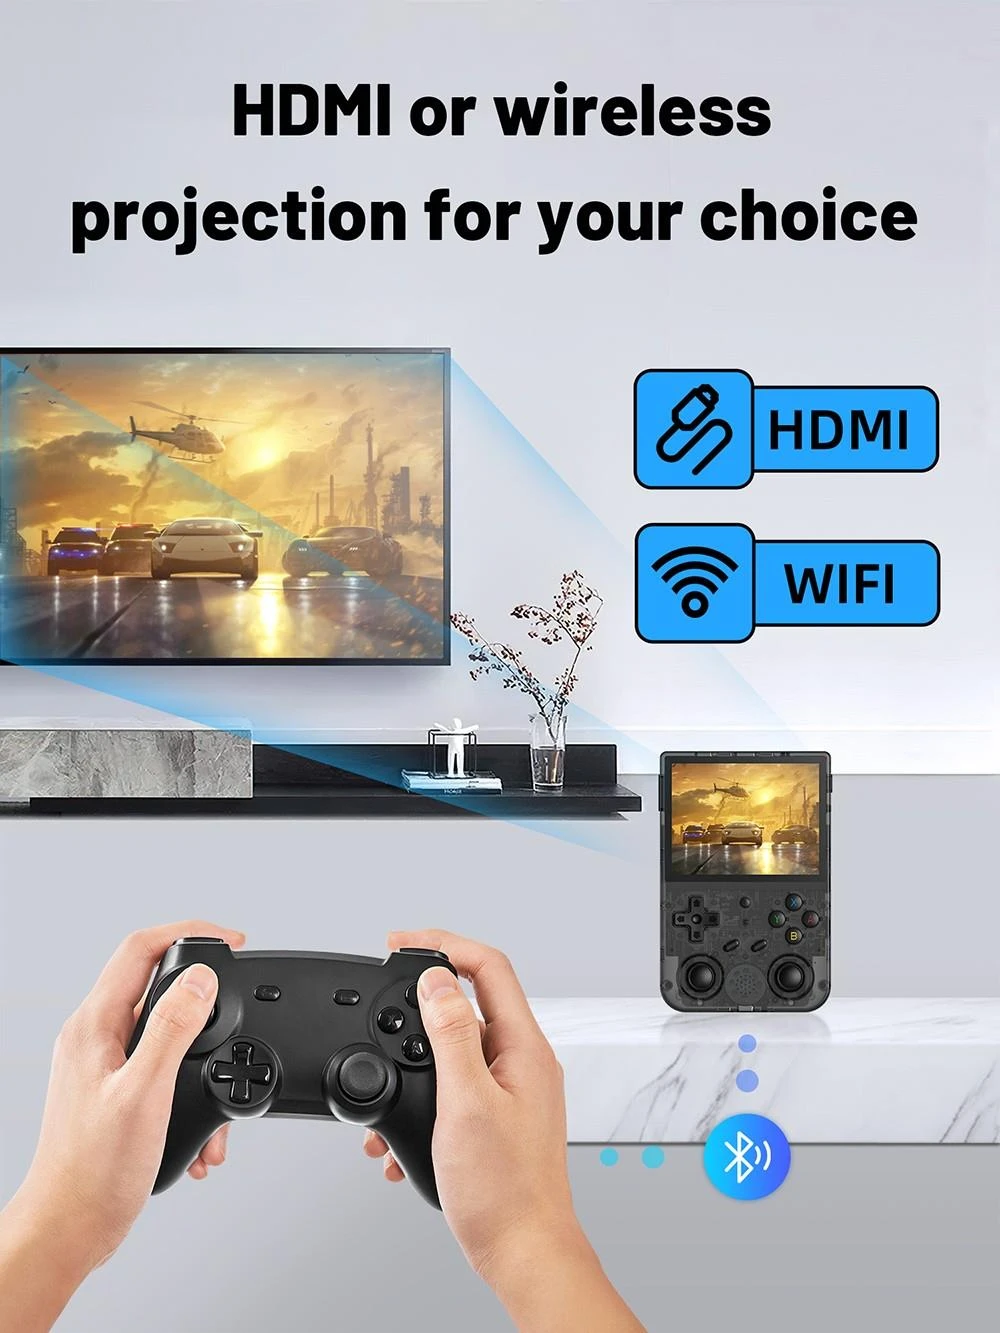 ANBERNIC RG353VS Portable Game Console Android 16GB Linux+64GB Game TF Card 3.5'' IPS Retro WiFi Bluetooth - Black Transparent